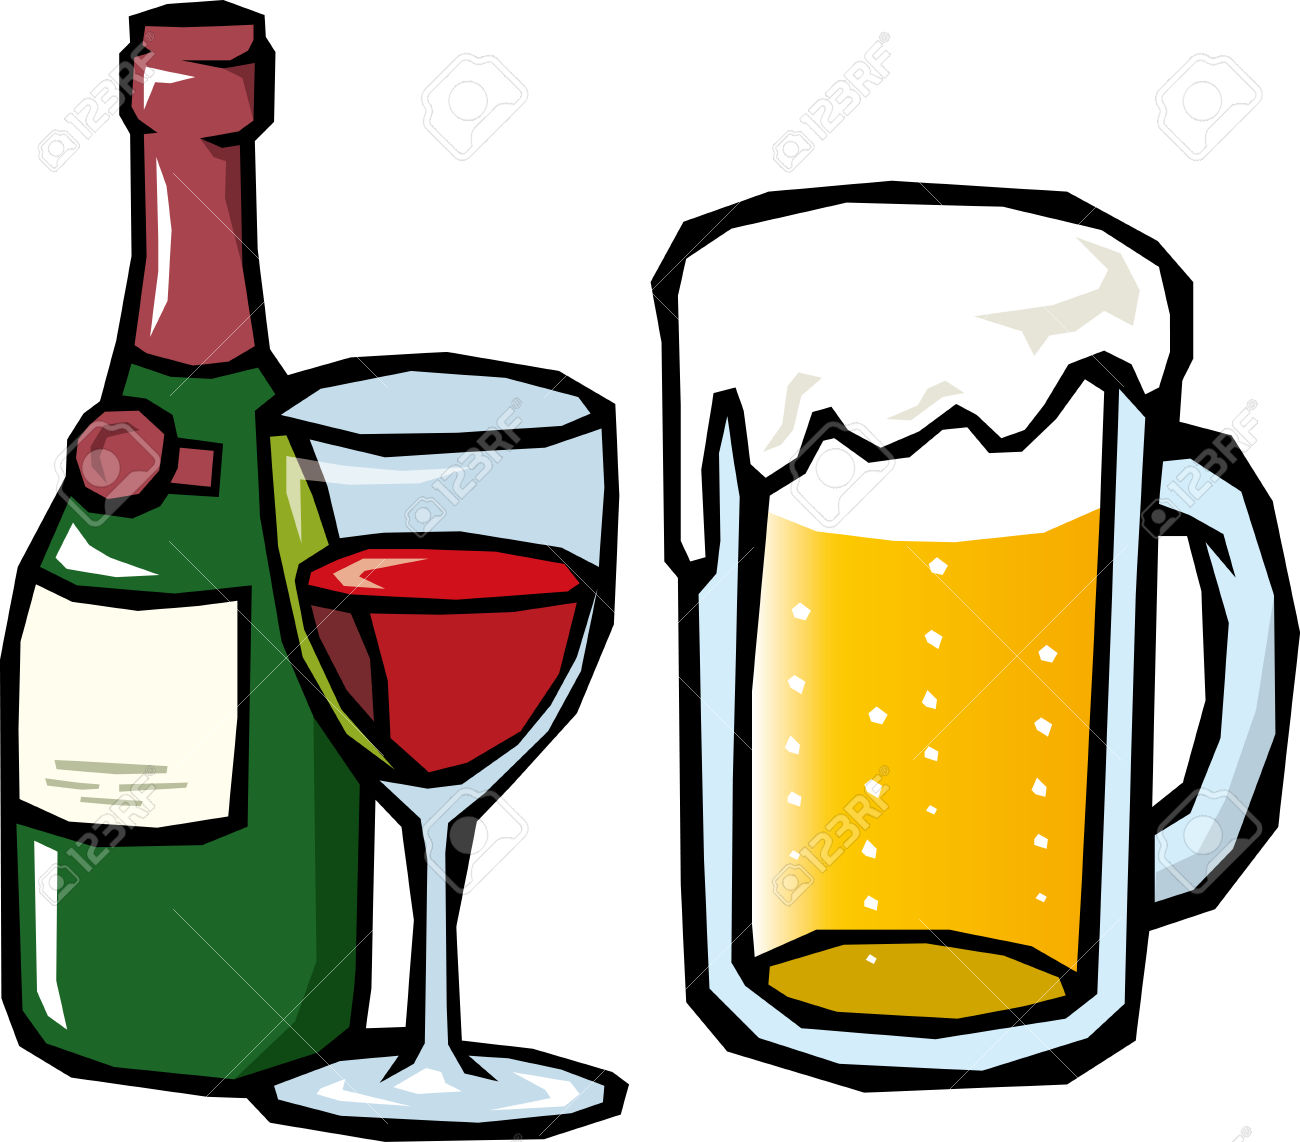 beer can clipart free - photo #49